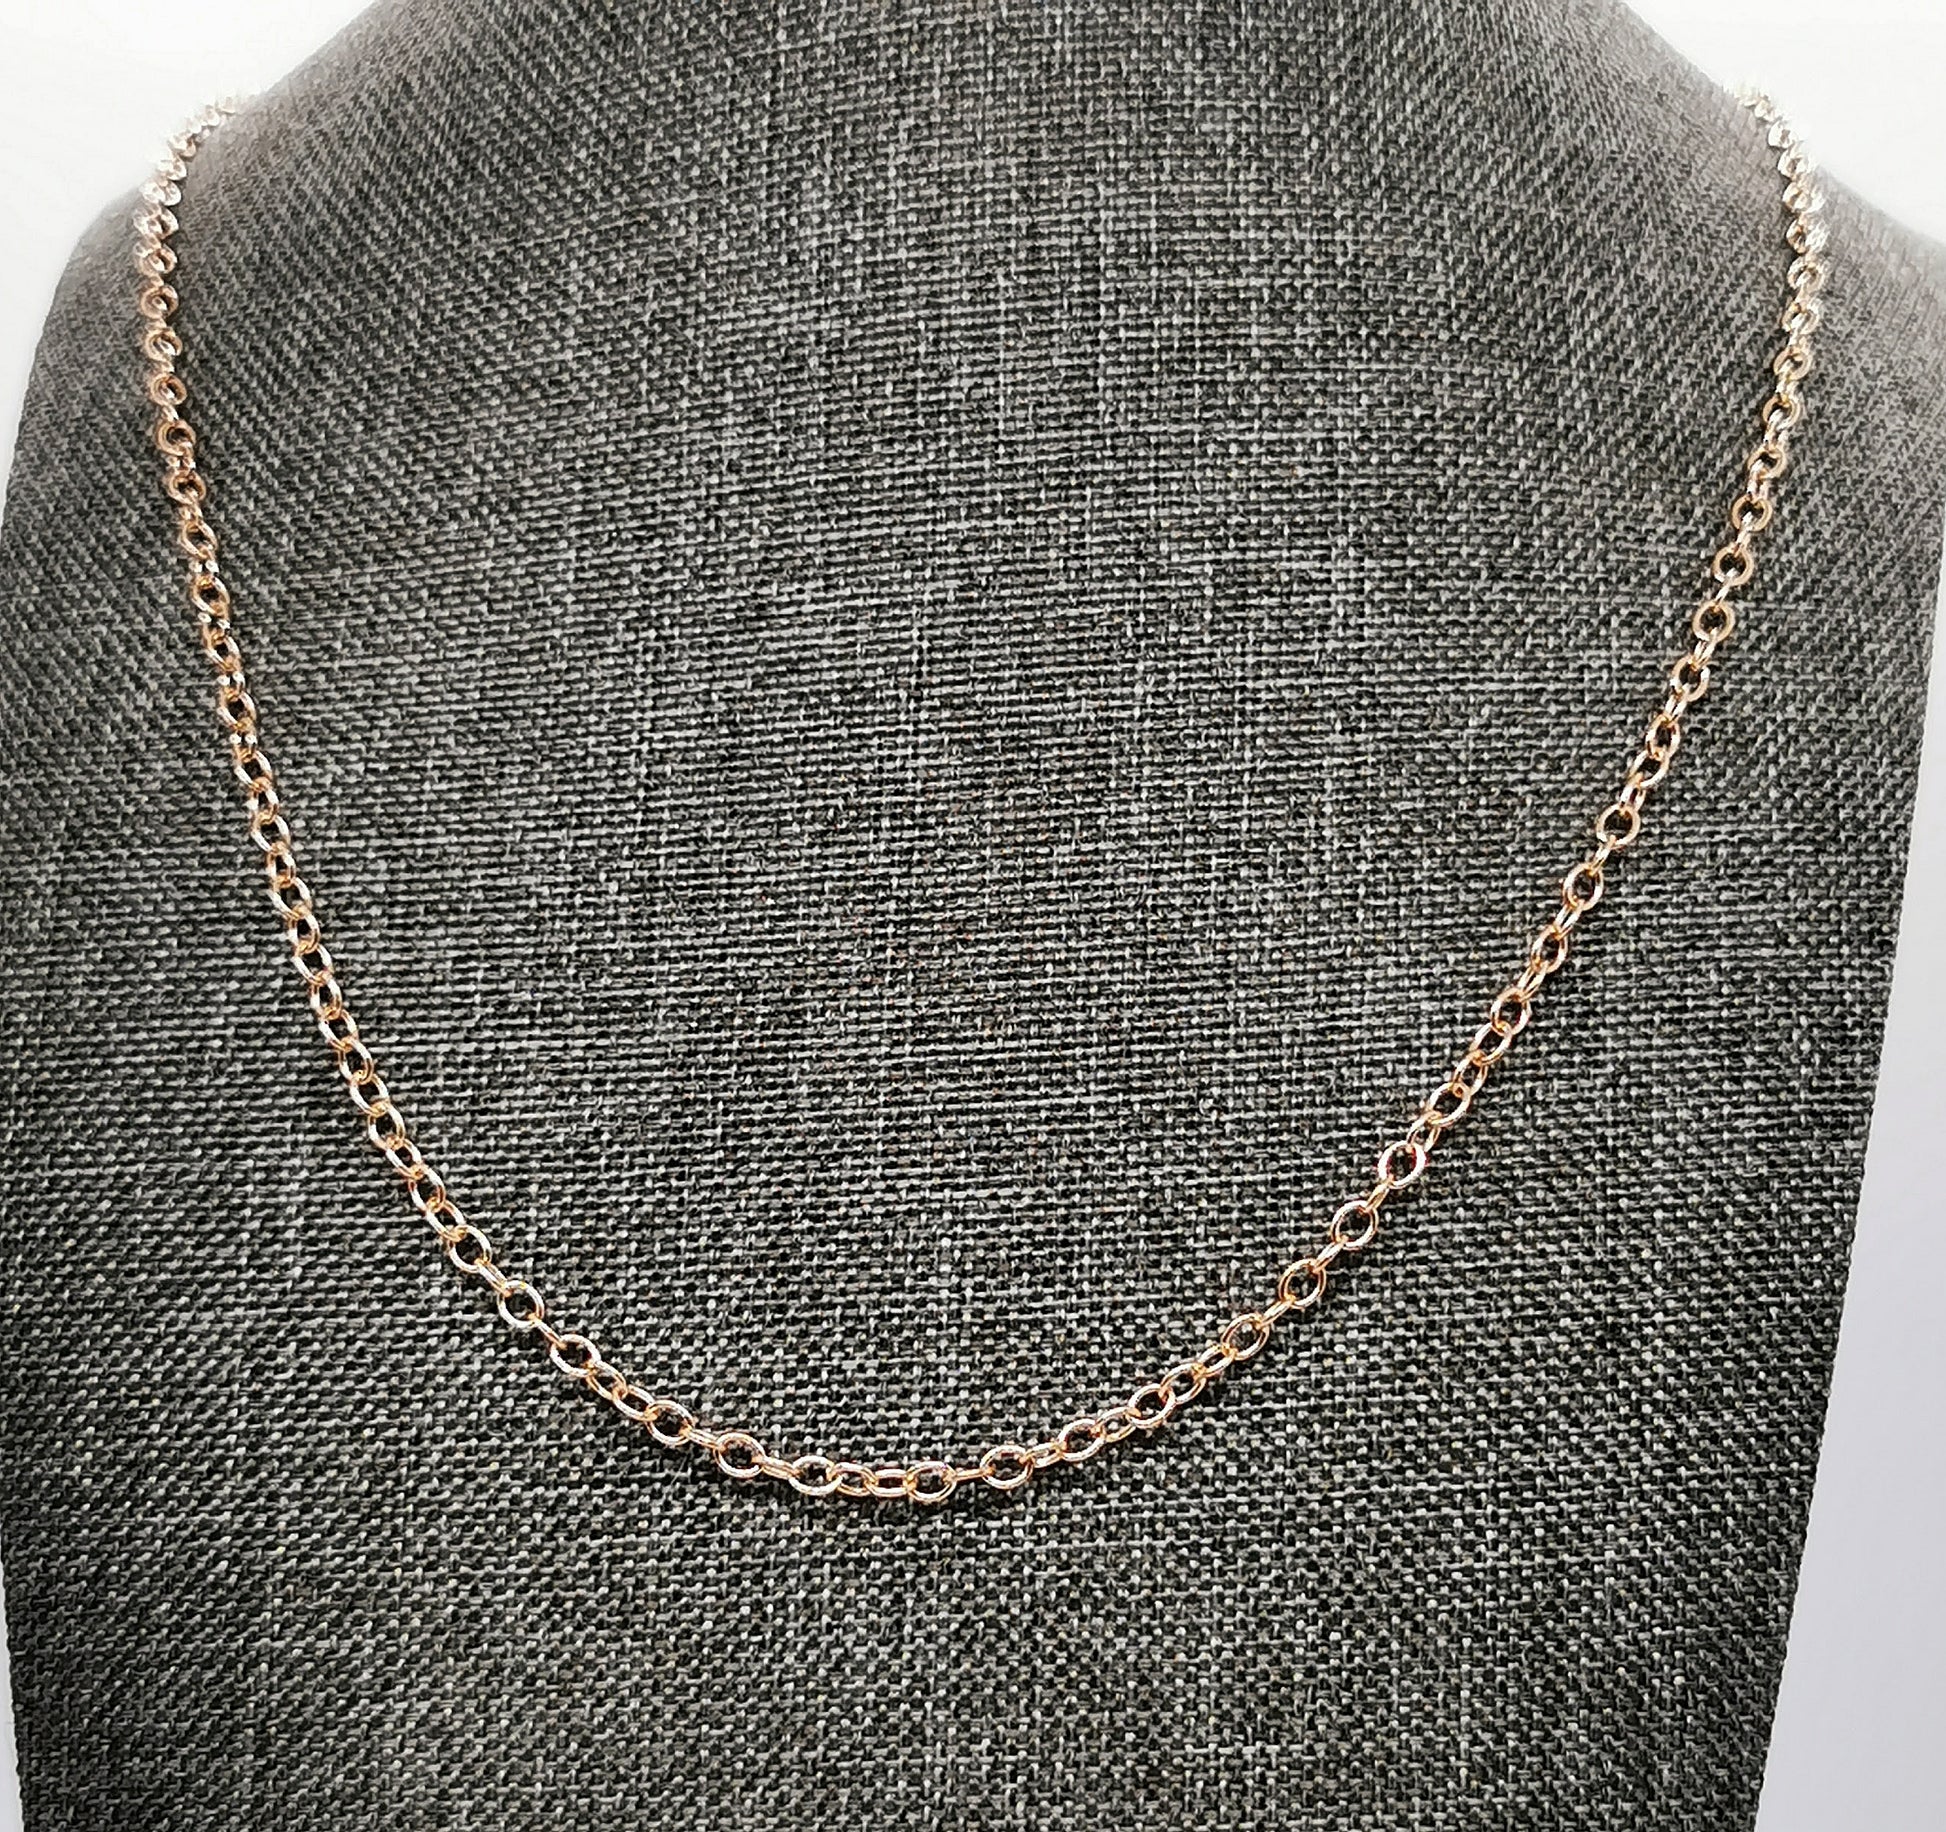 Antique Bronze Cable Chain 3mm Made to Order, bronze cable chain, bronze chain, cable chain, necklace chain, bronze necklace chain, 3mm chain, 3mm bronze chain, bronze chain jewelry, bronze chain jewellery, chain jewelry chain jewellery, bronze jewellery, bronze jewelry, 3mm chain necklace, 3mm bronze chain necklace